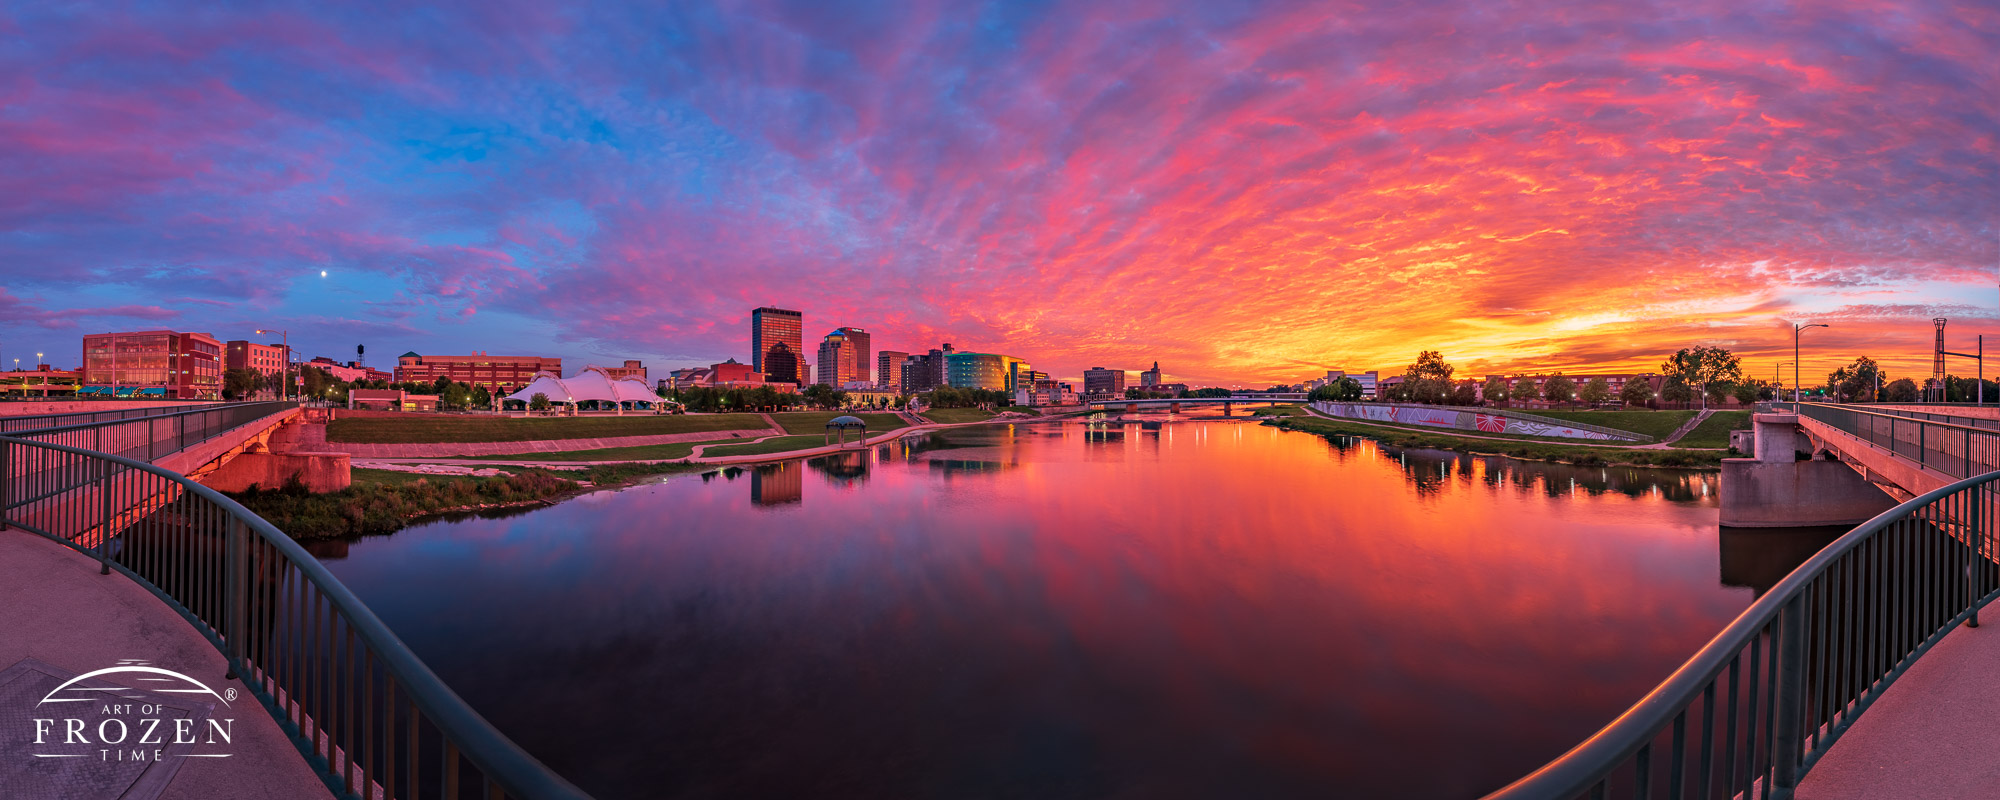 Panorama of the Dayton Skyline where the heavily clouded sky caught warm colorful light appearing as skyfire